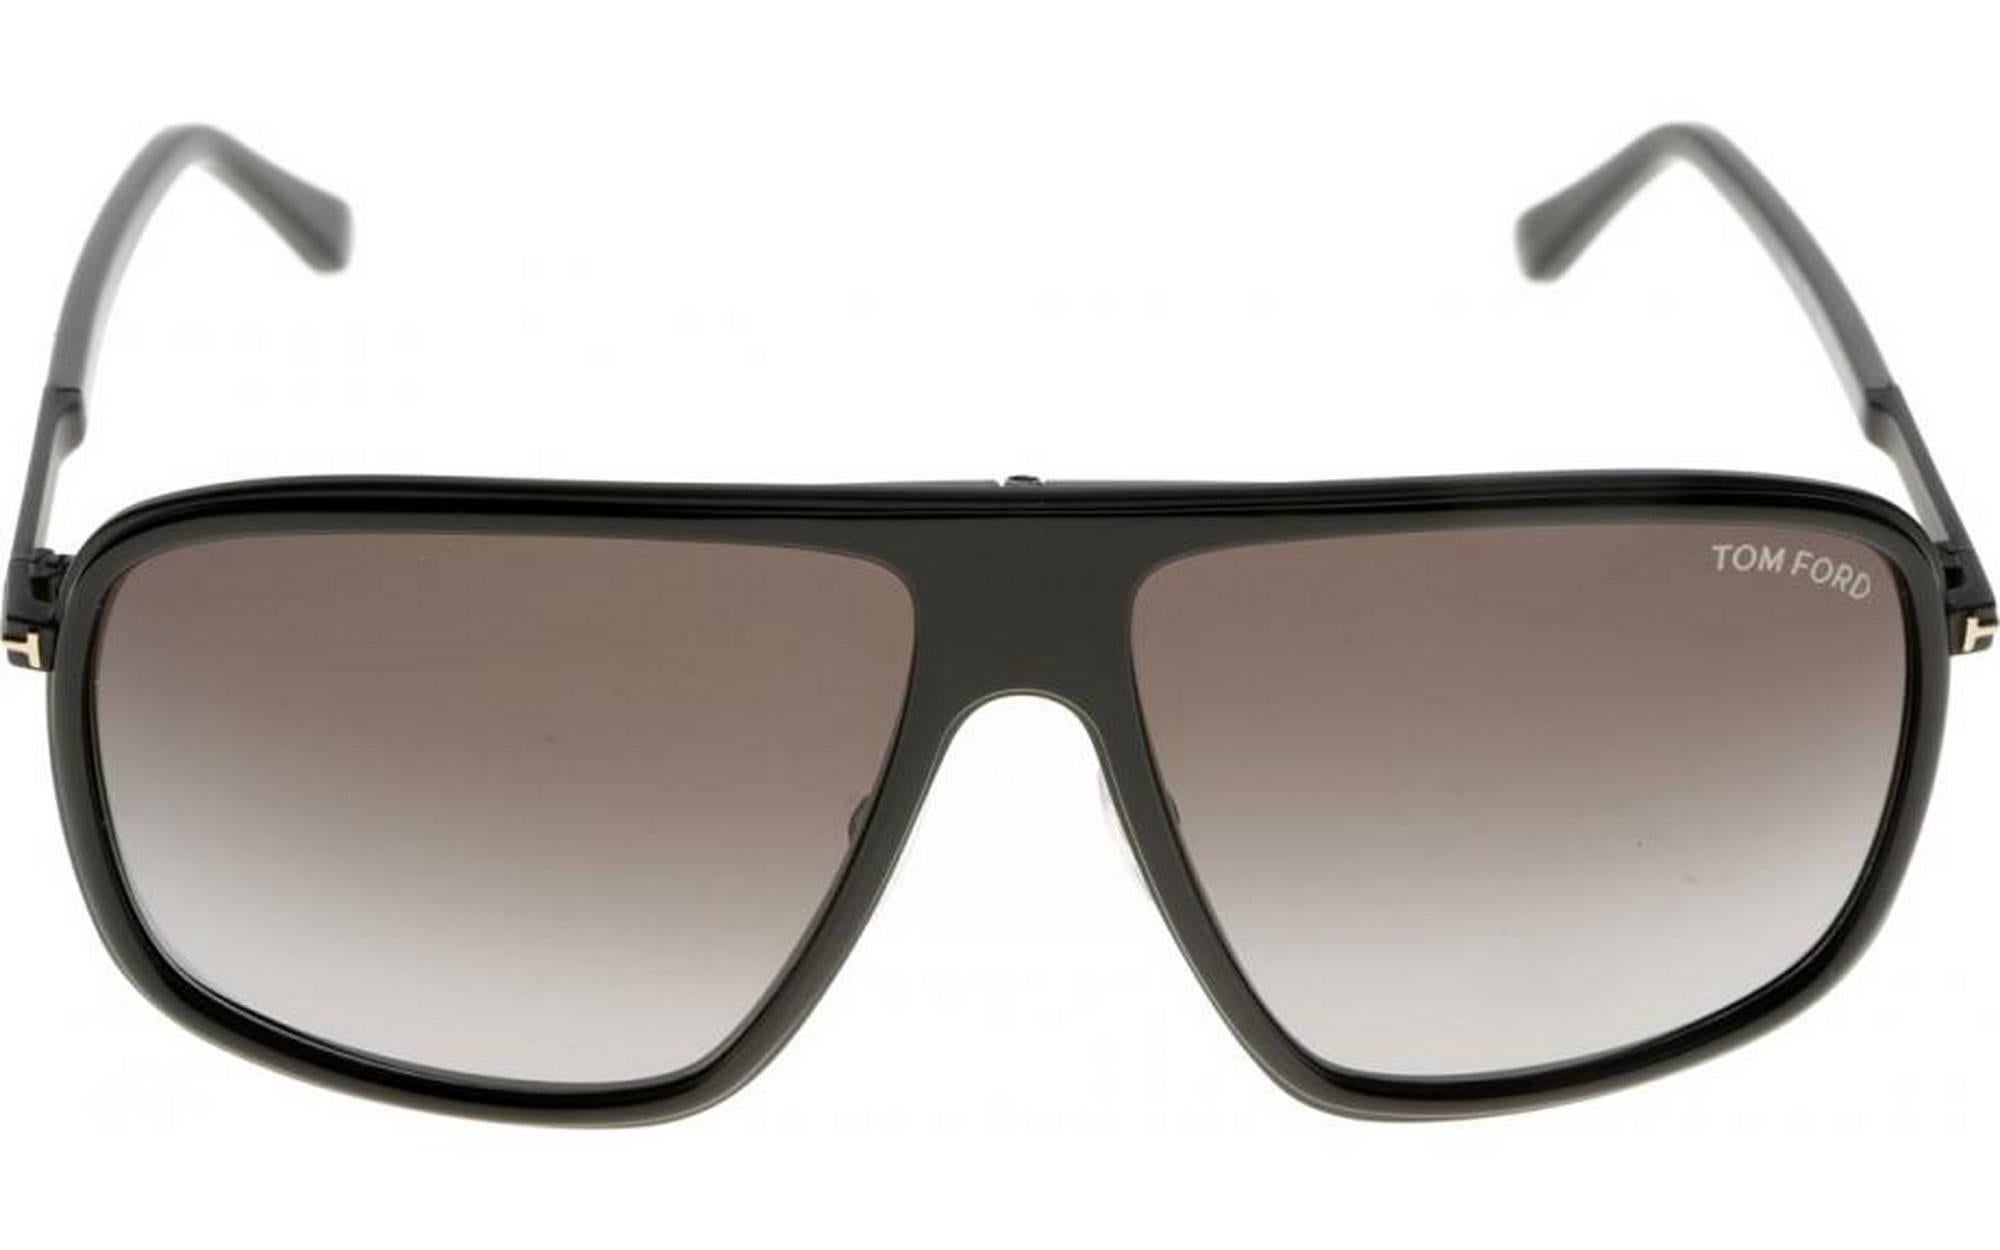 Tom Ford FT0463-01B-60 Metal Shiny Black - Graduated Smoke Sunglasses
Brand: Tom Ford
Style Code: FT0463-01B-60
Frame: Metal
Color: Shiny Black - Graduated Smoke
Brand new condition. 
Original case and cloth included. 
Made in Italy.